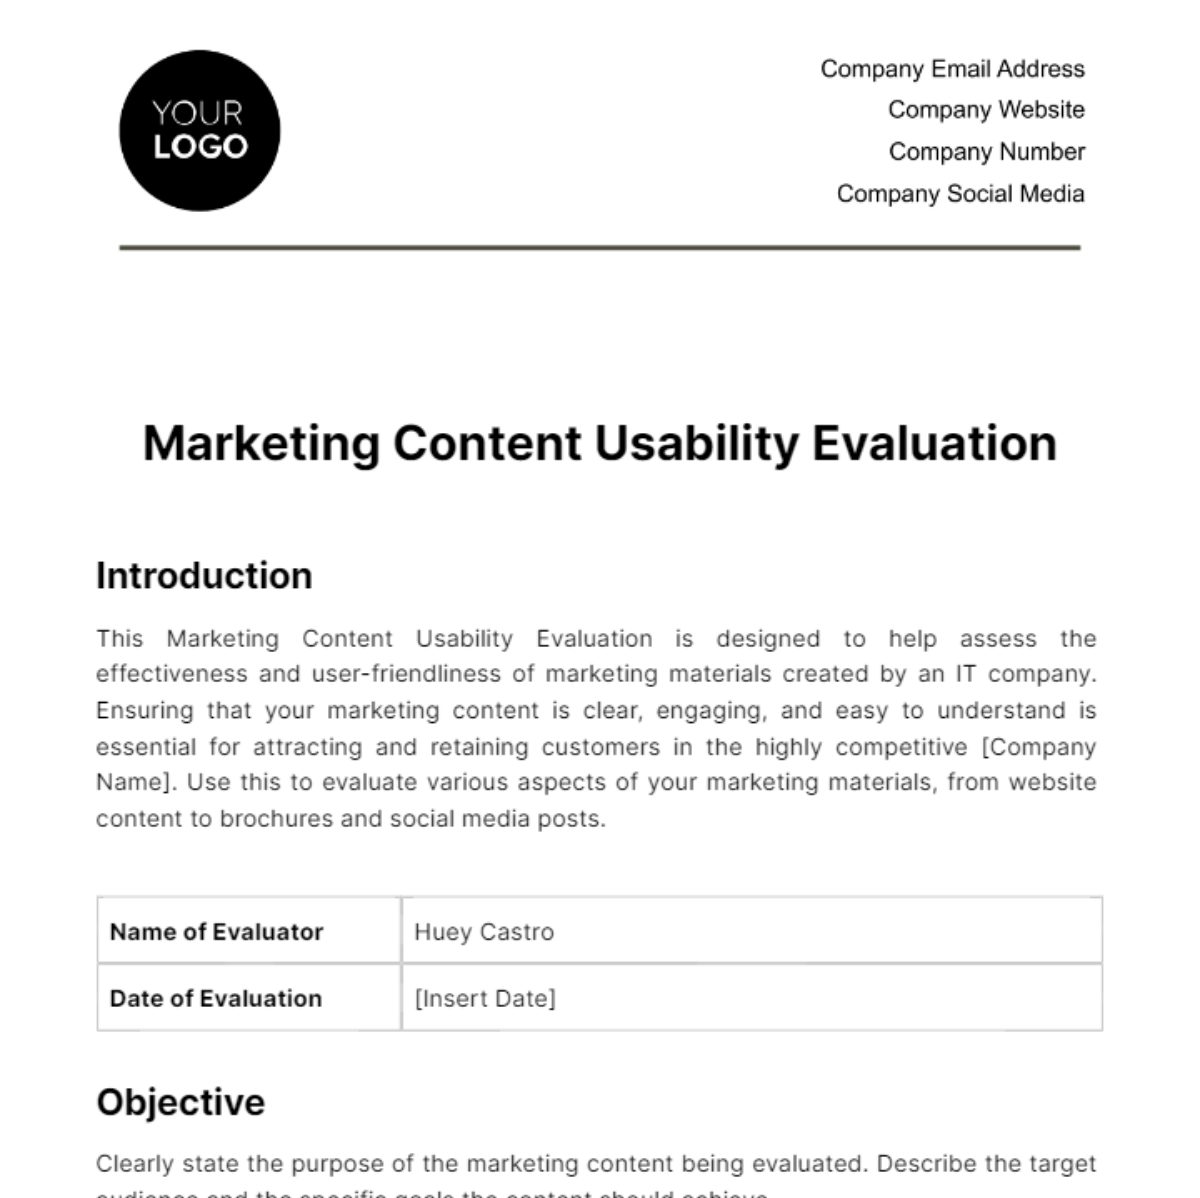 Marketing Content Usability Evaluation Template